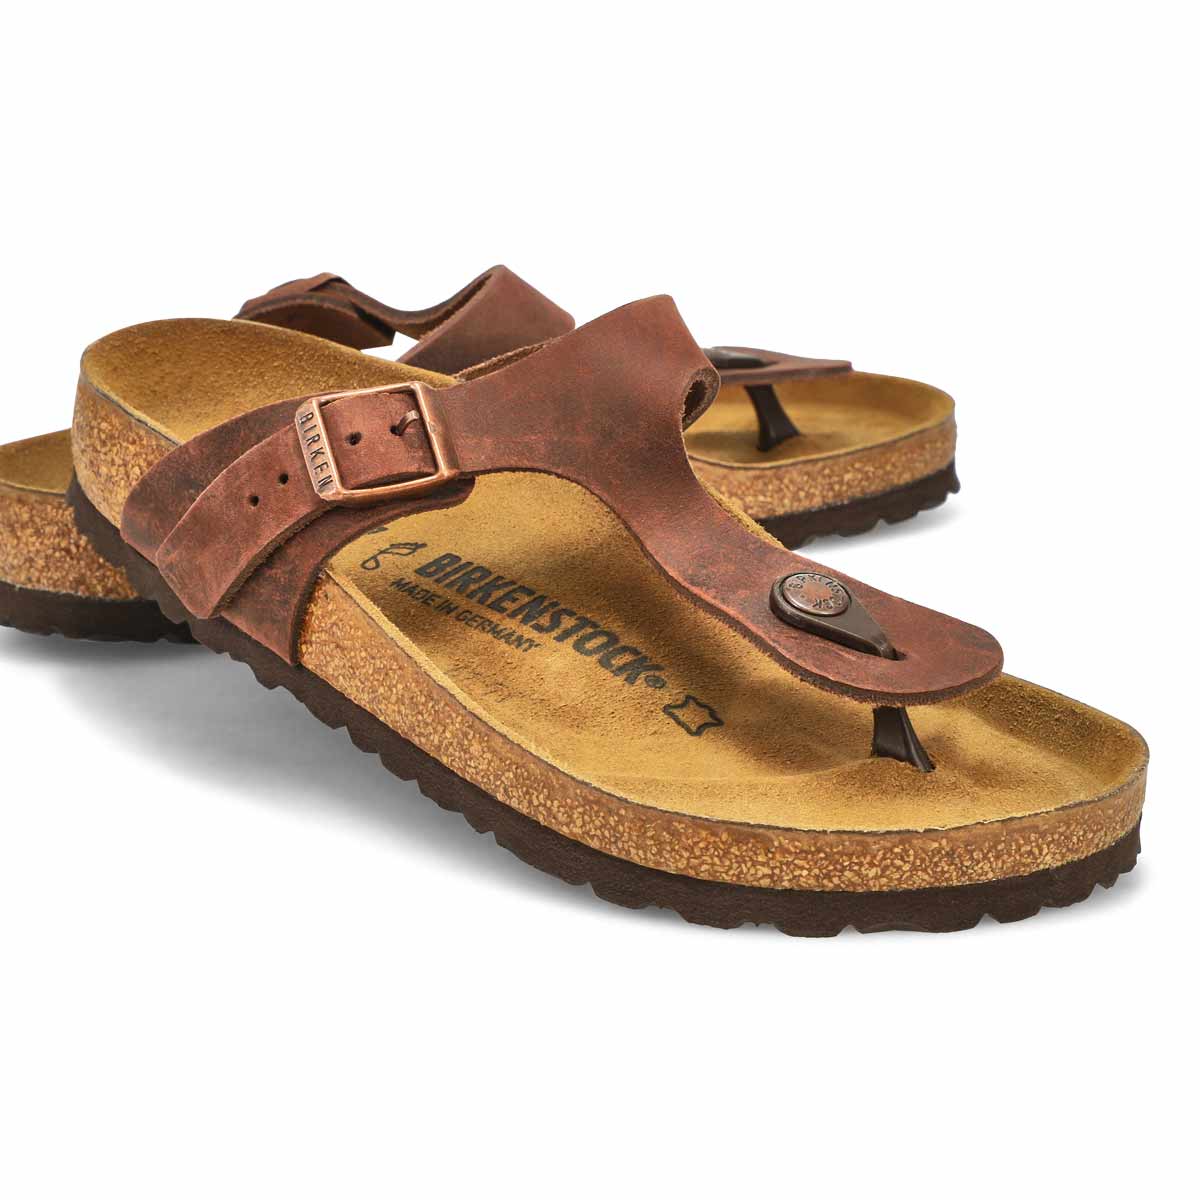 Birkenstock Women's Gizeh Oiled Leather Thong | SoftMoc.com